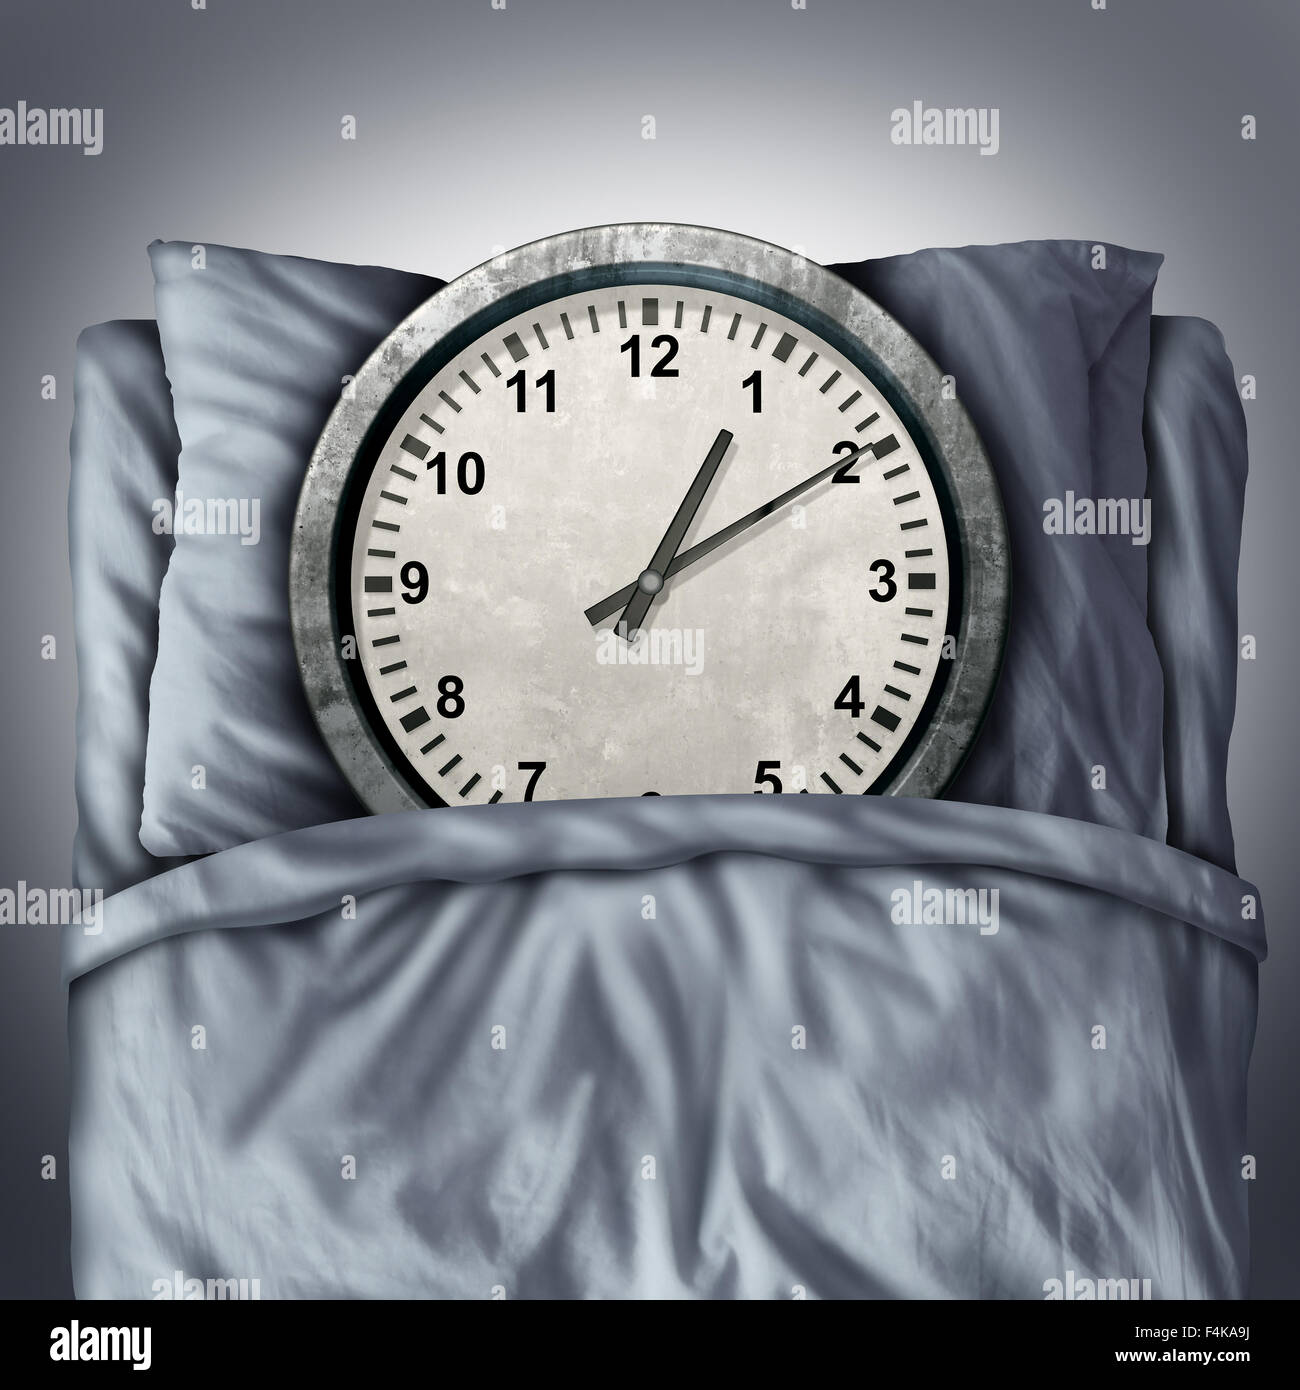 Getting enough sleep concept or sleeping trouble symbol as a clock